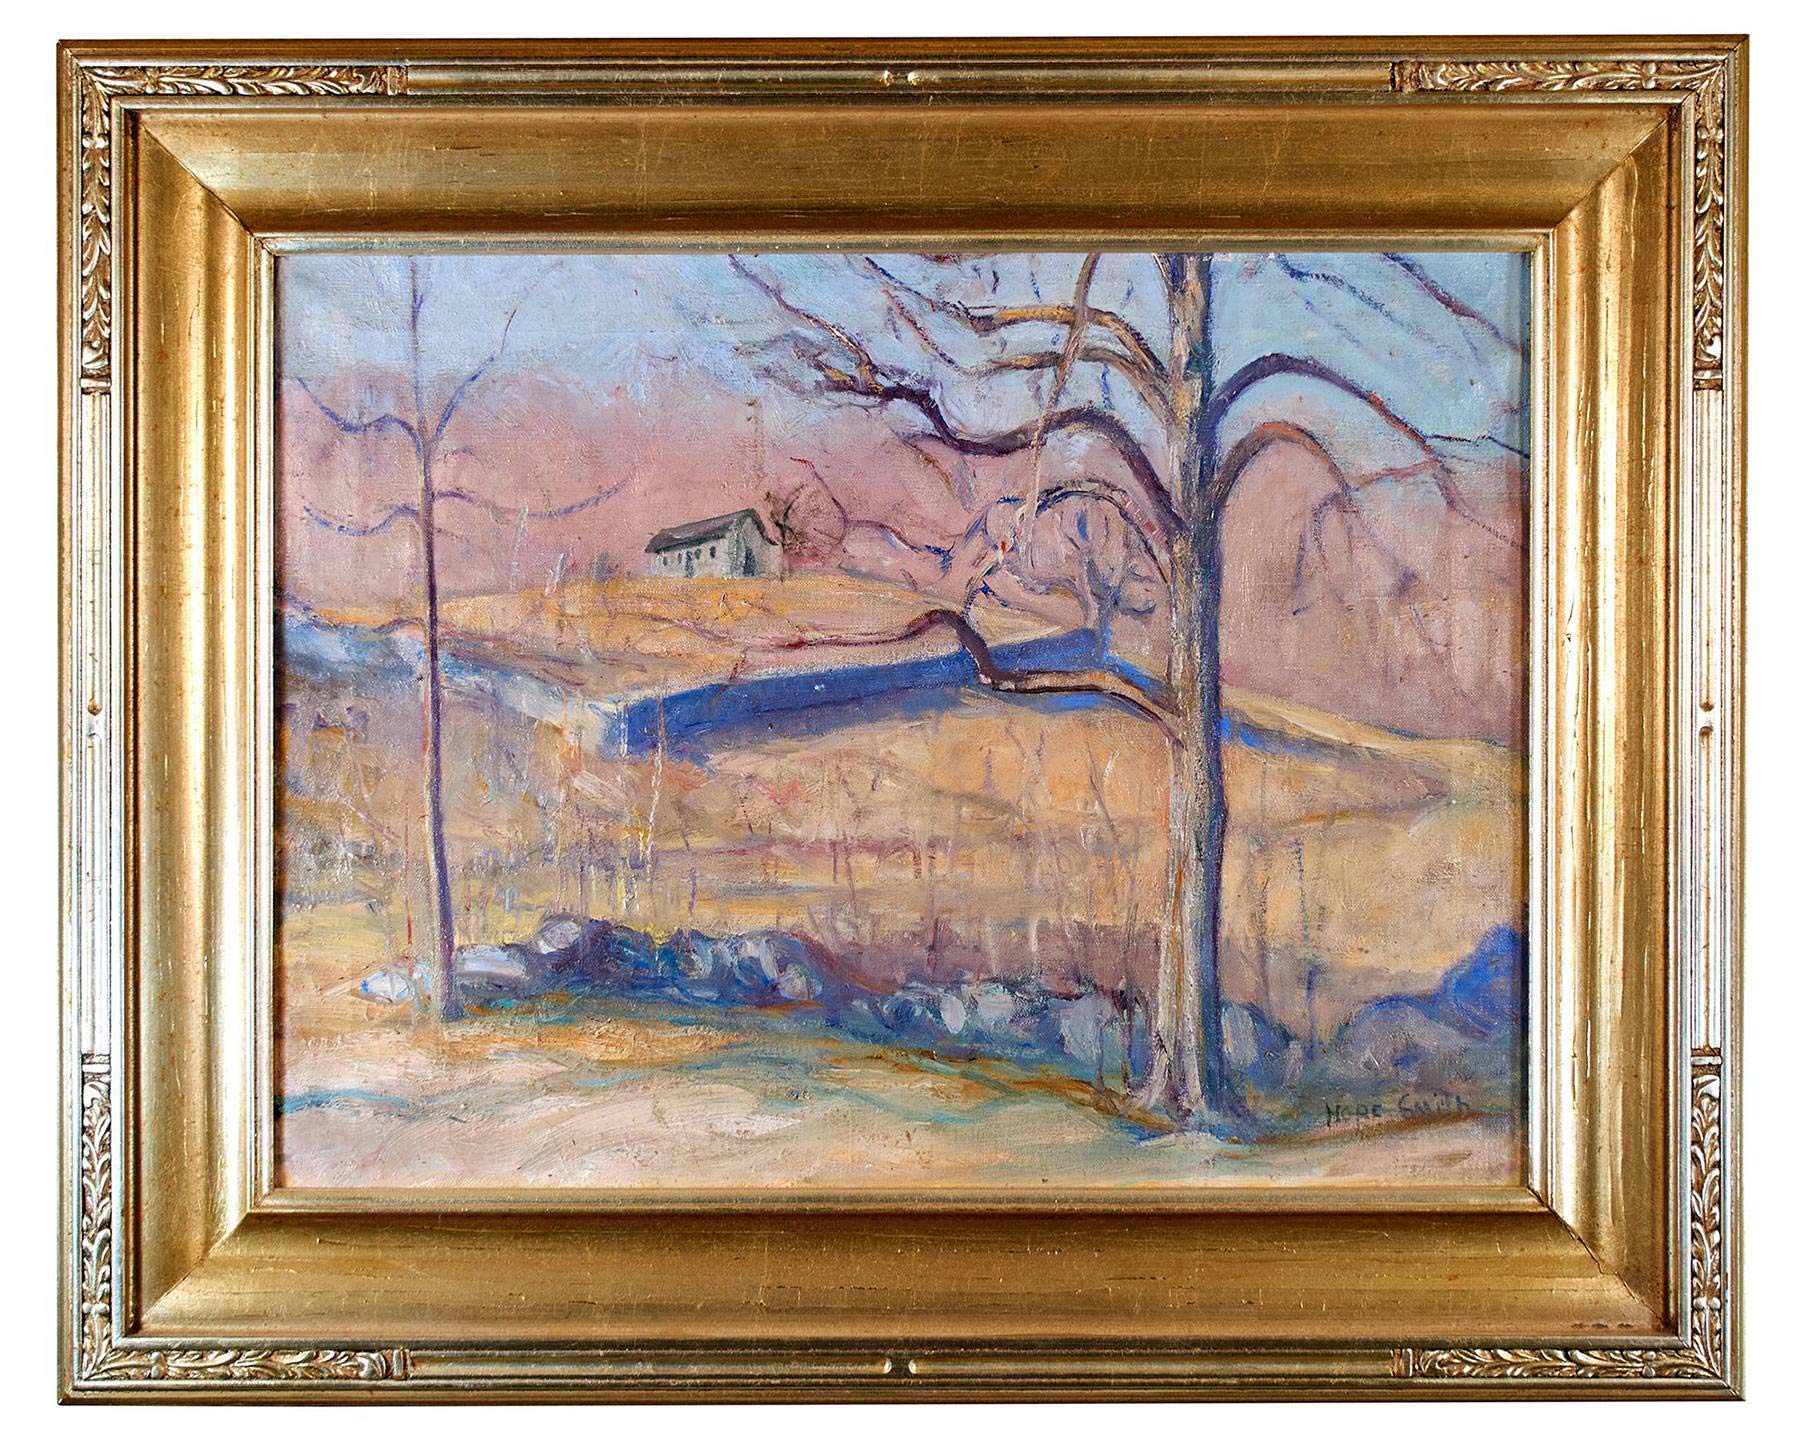 Hope Smith (American, 1879-1965), Impressionist landscape., oil on canvas, $50-$300.